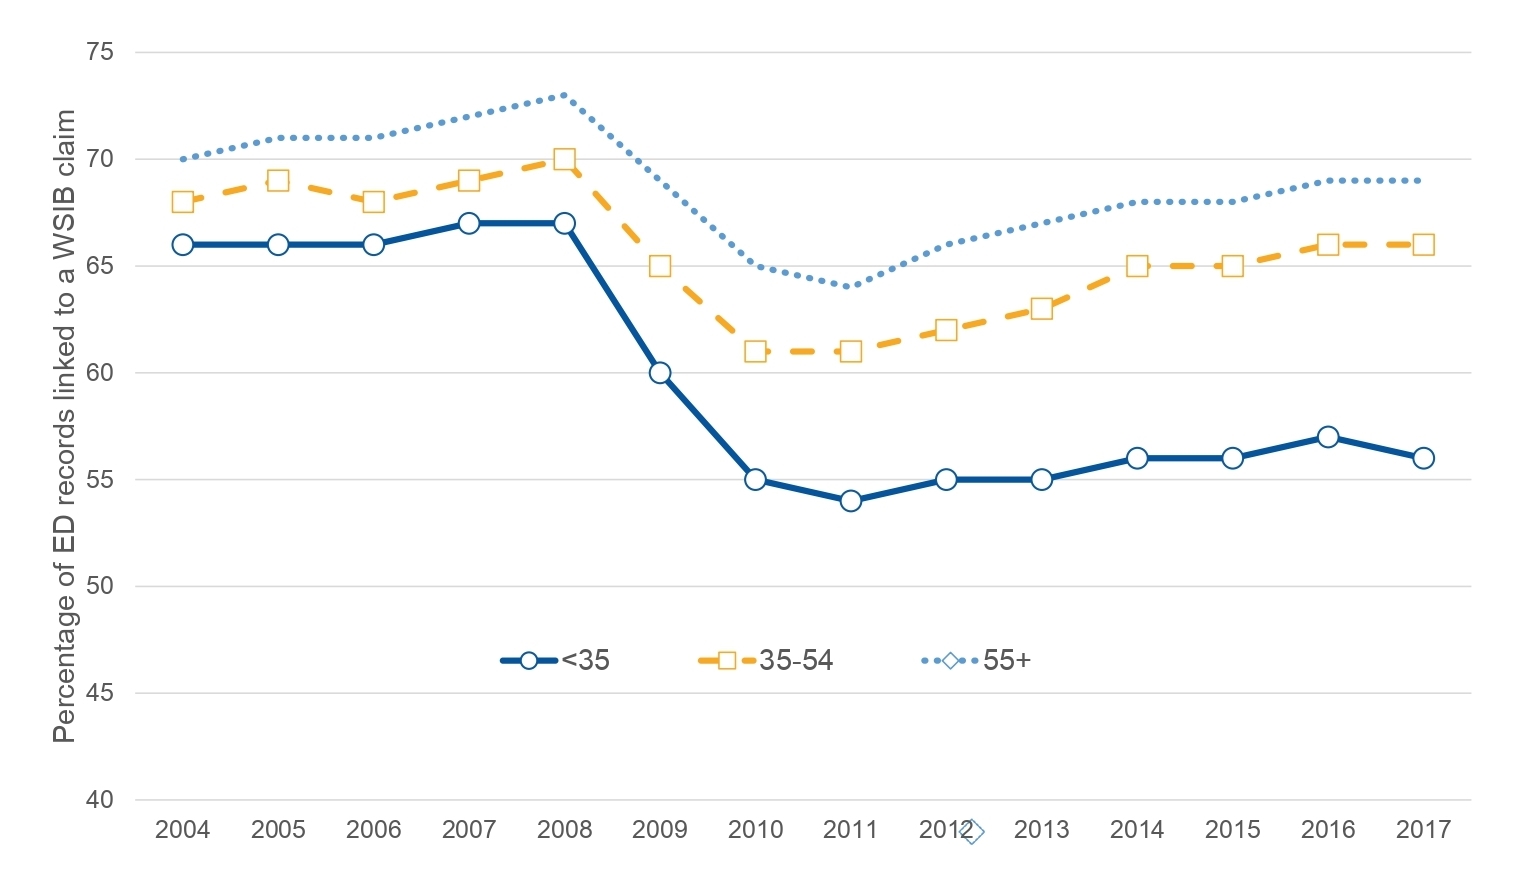 Three line graphs represent changes from 2004 to 2017 in the percentage of ER visits linked to a WSIB claim. The top two lines, for age groups 35 to 54, and for 55 and older, parallel each other. They start around 68-70 per cent in 2004, drop to 60-64 per cent in 2011, and slowly climbe back up to 66-69 per cent in 2017. In contrast, the third line, for ages 34 and younger, takes a deeper drop and stays low. It starts at 66 per cent in 2004, falls to 54 in 2011 and stays around 55-57 in the years after.